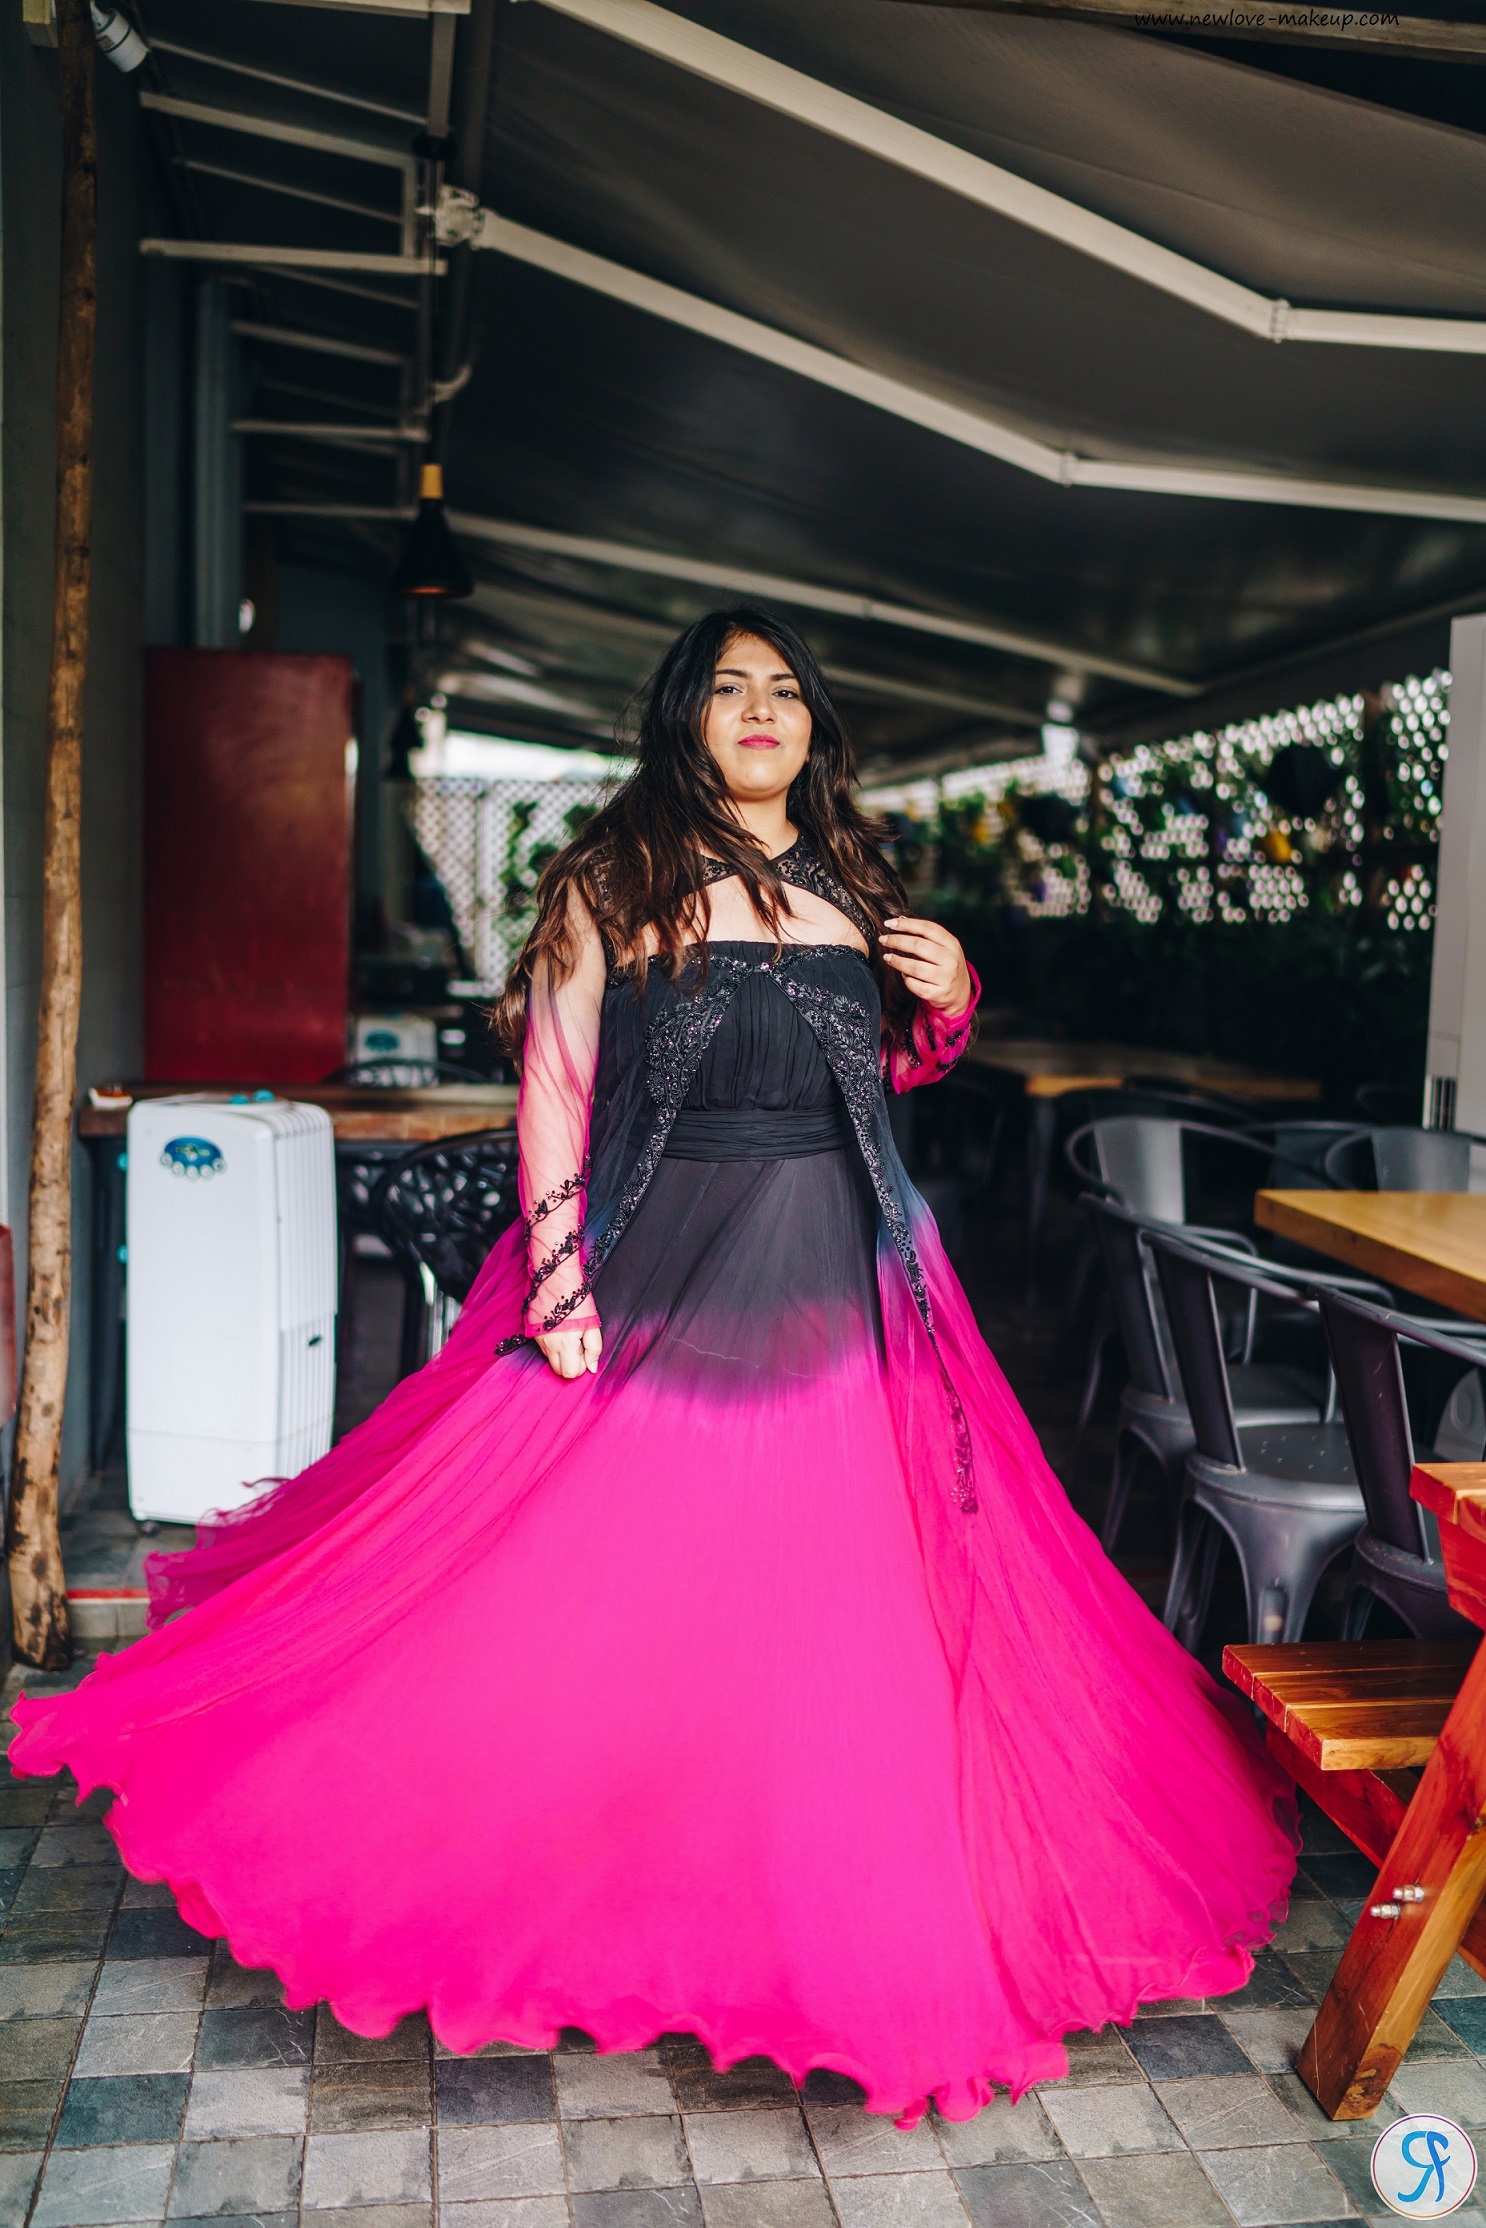 OOTD: Black & Fuchsia Pink Ombre Maxi Dress with Embellished Cape